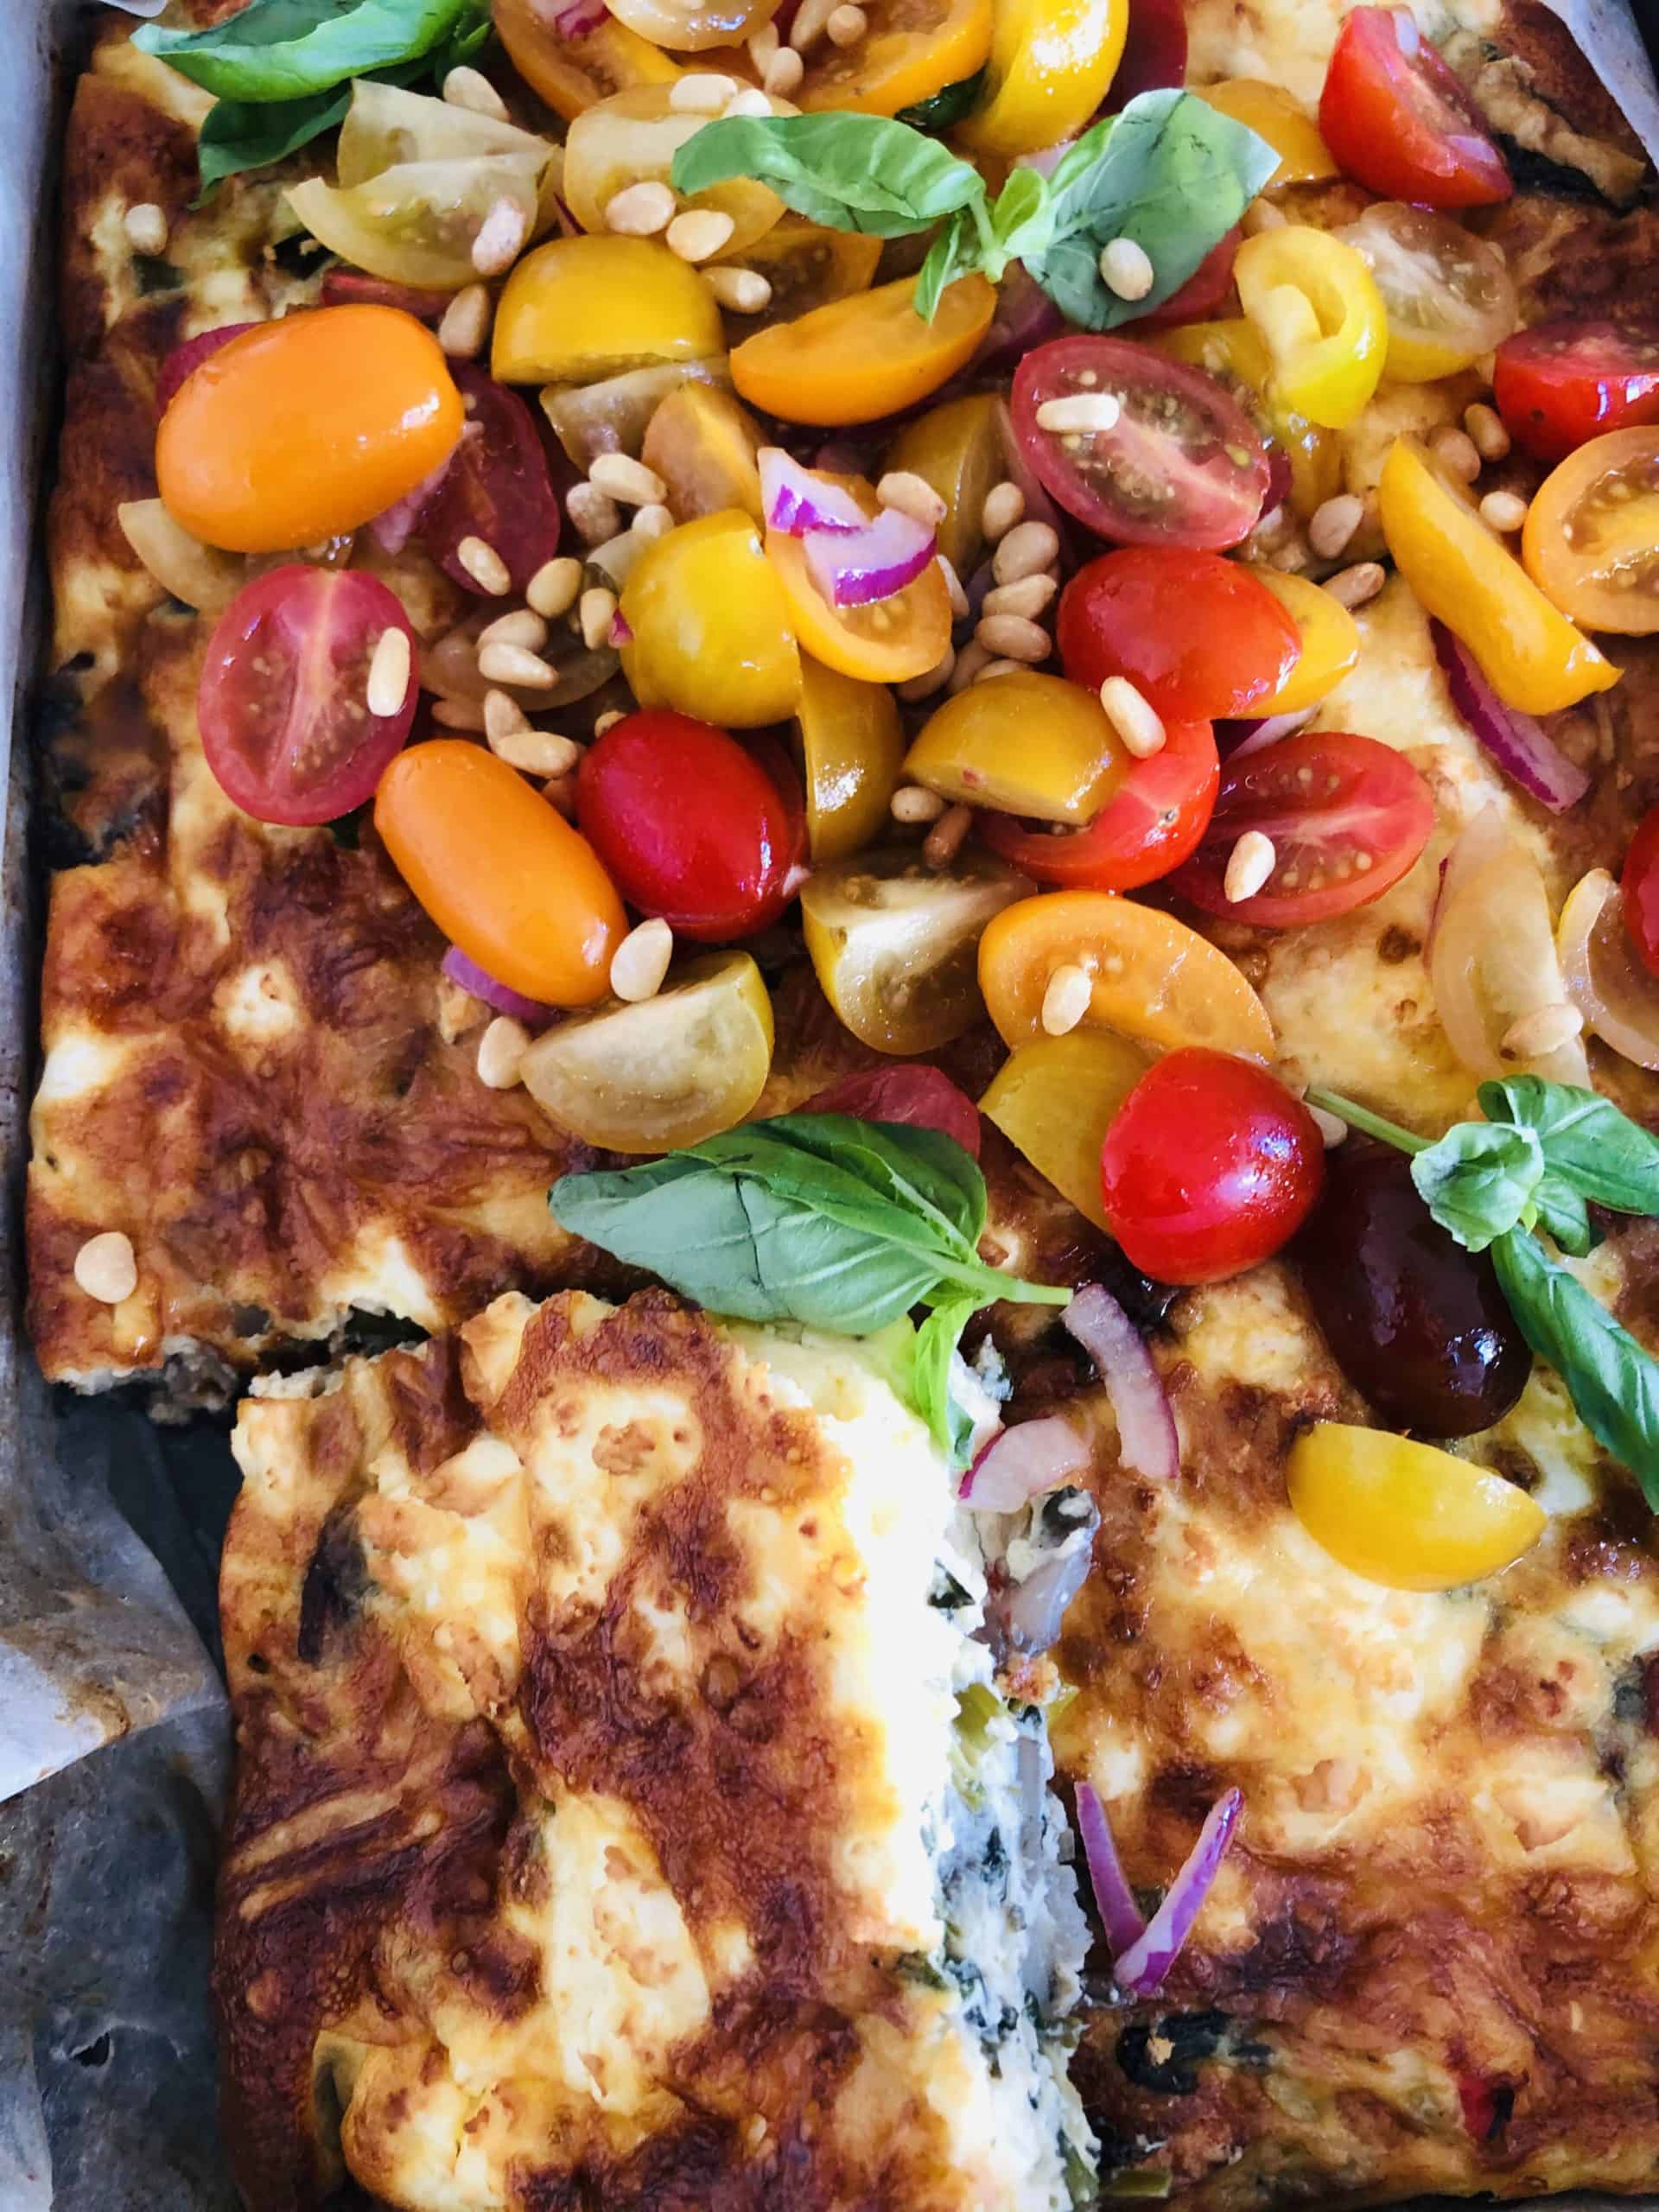 Healthy Vegetable frittata with fresh tomato salad.